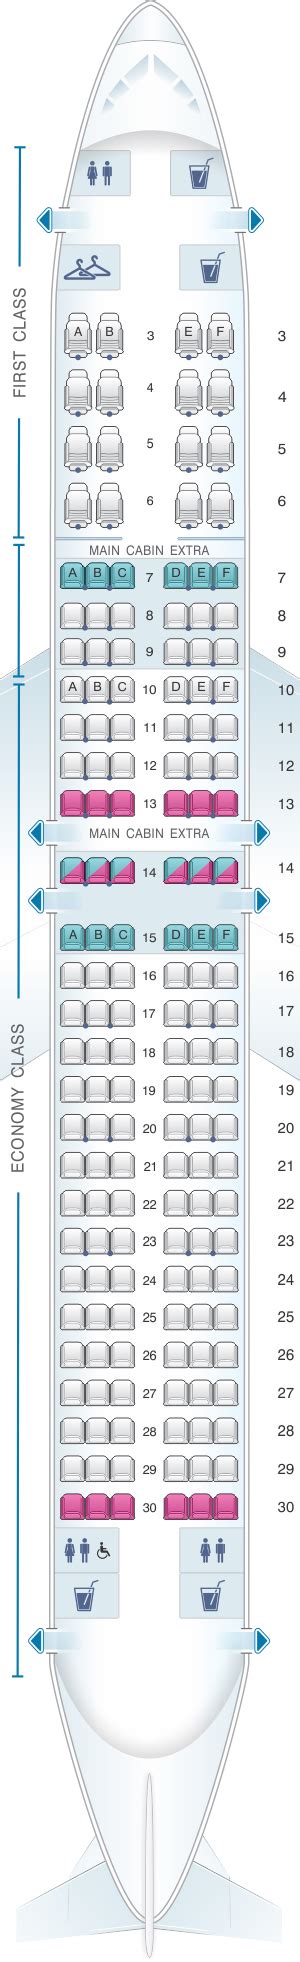 Boeing 737 800 Seating Chart American Airlines Review Home Decor